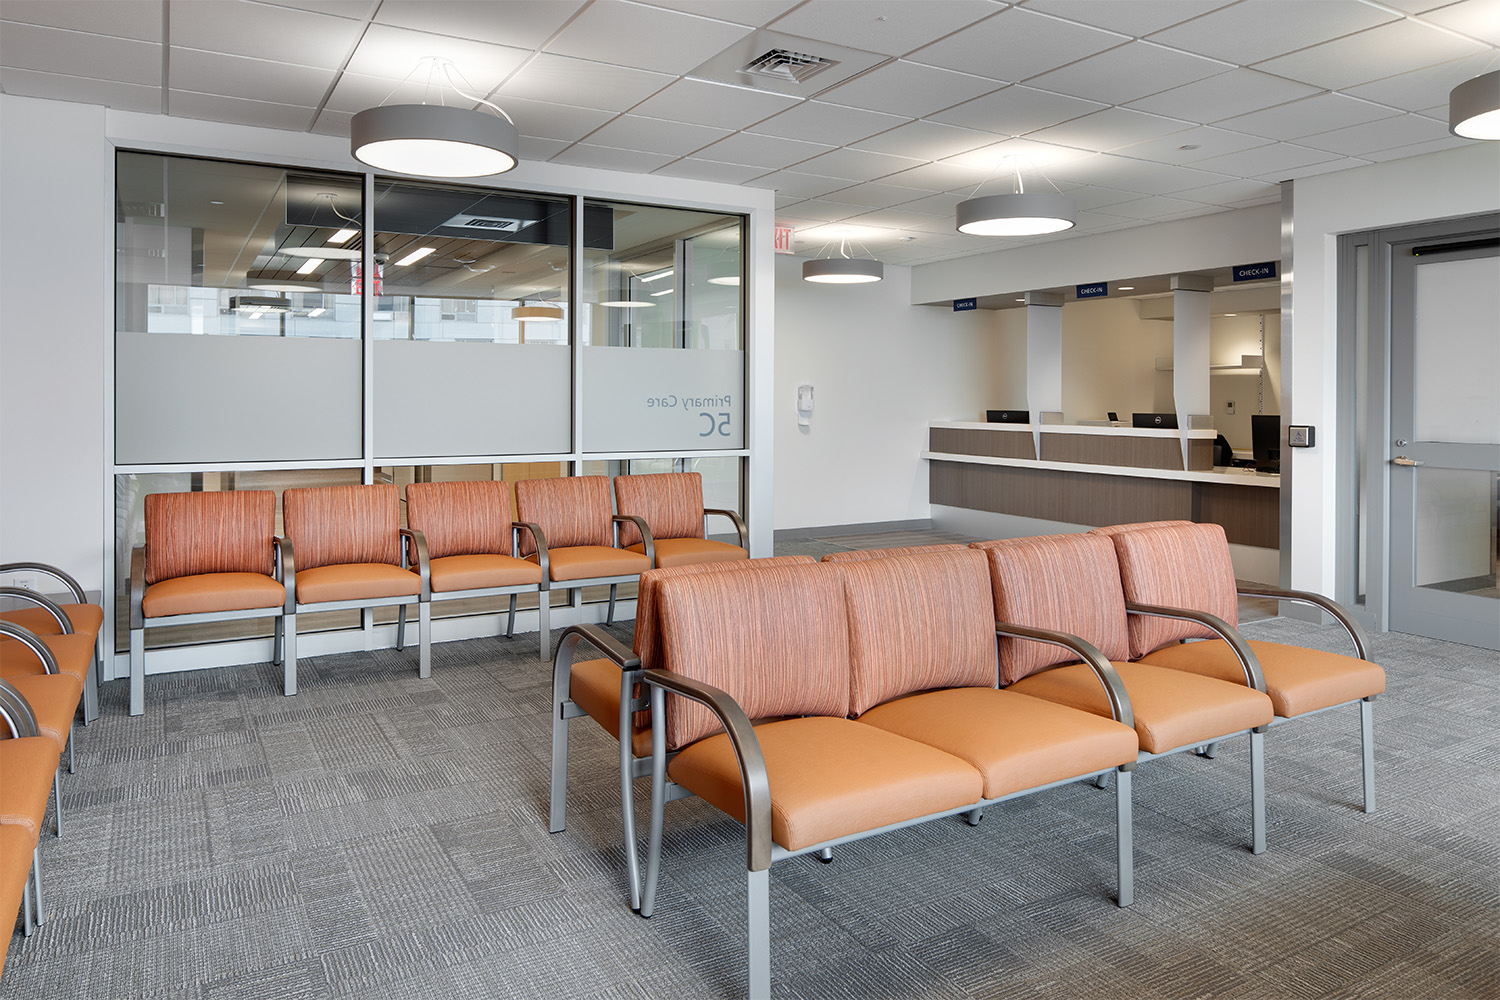 Primary Care lobby with orange seating